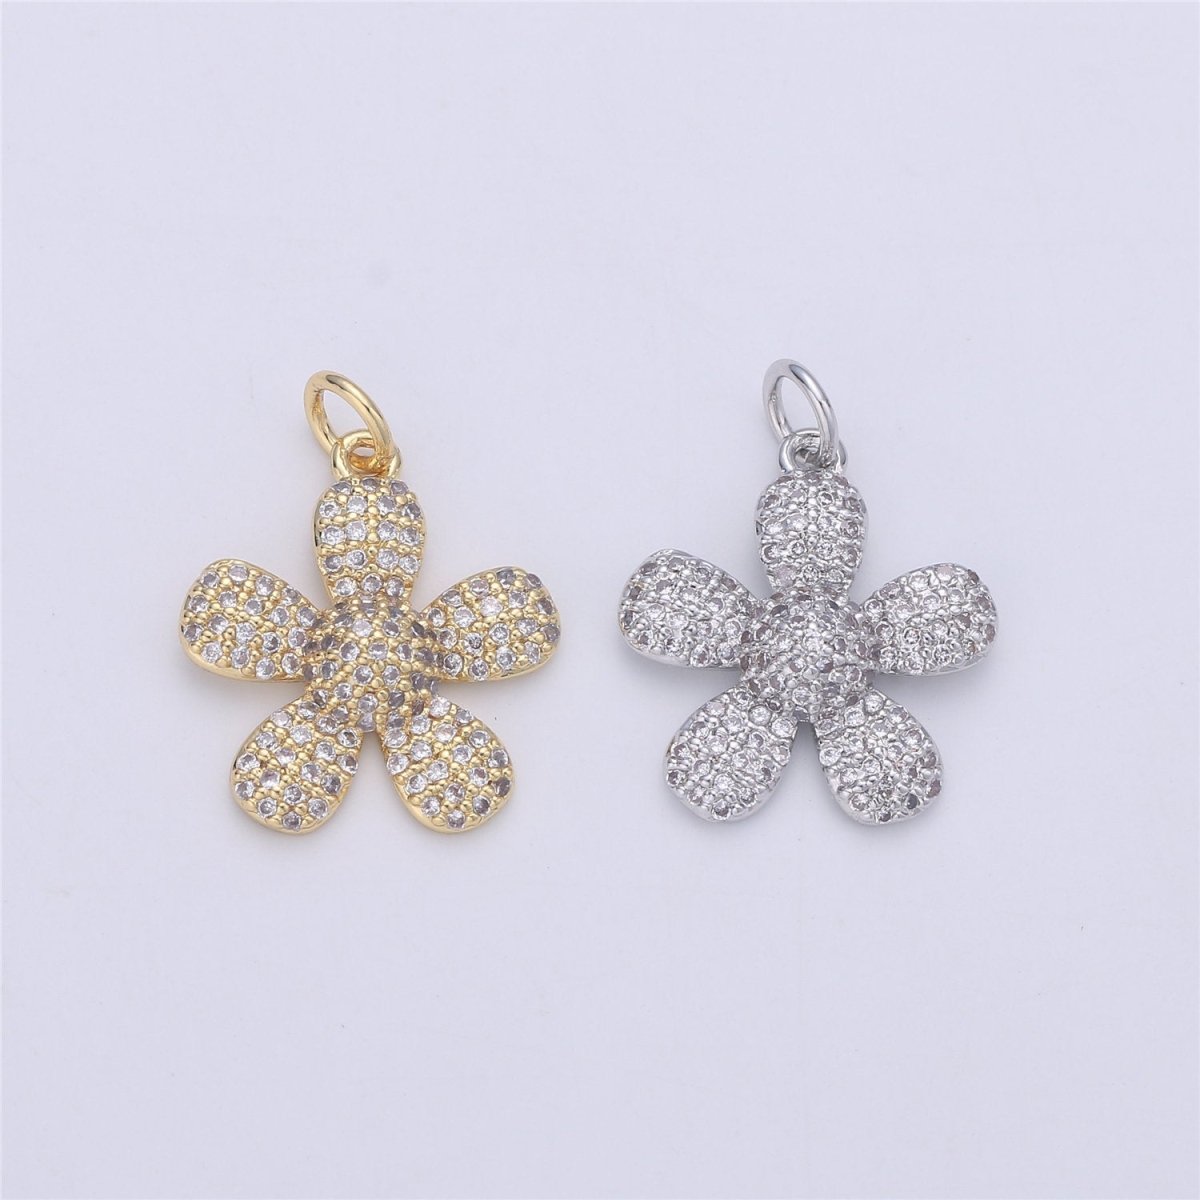 14k Gold Filled Flower Charm Micro Pave Daisy Charm Cubic Daisy Pendant Floral Pendant for Necklace Bracelet Earring Component C-925 - DLUXCA